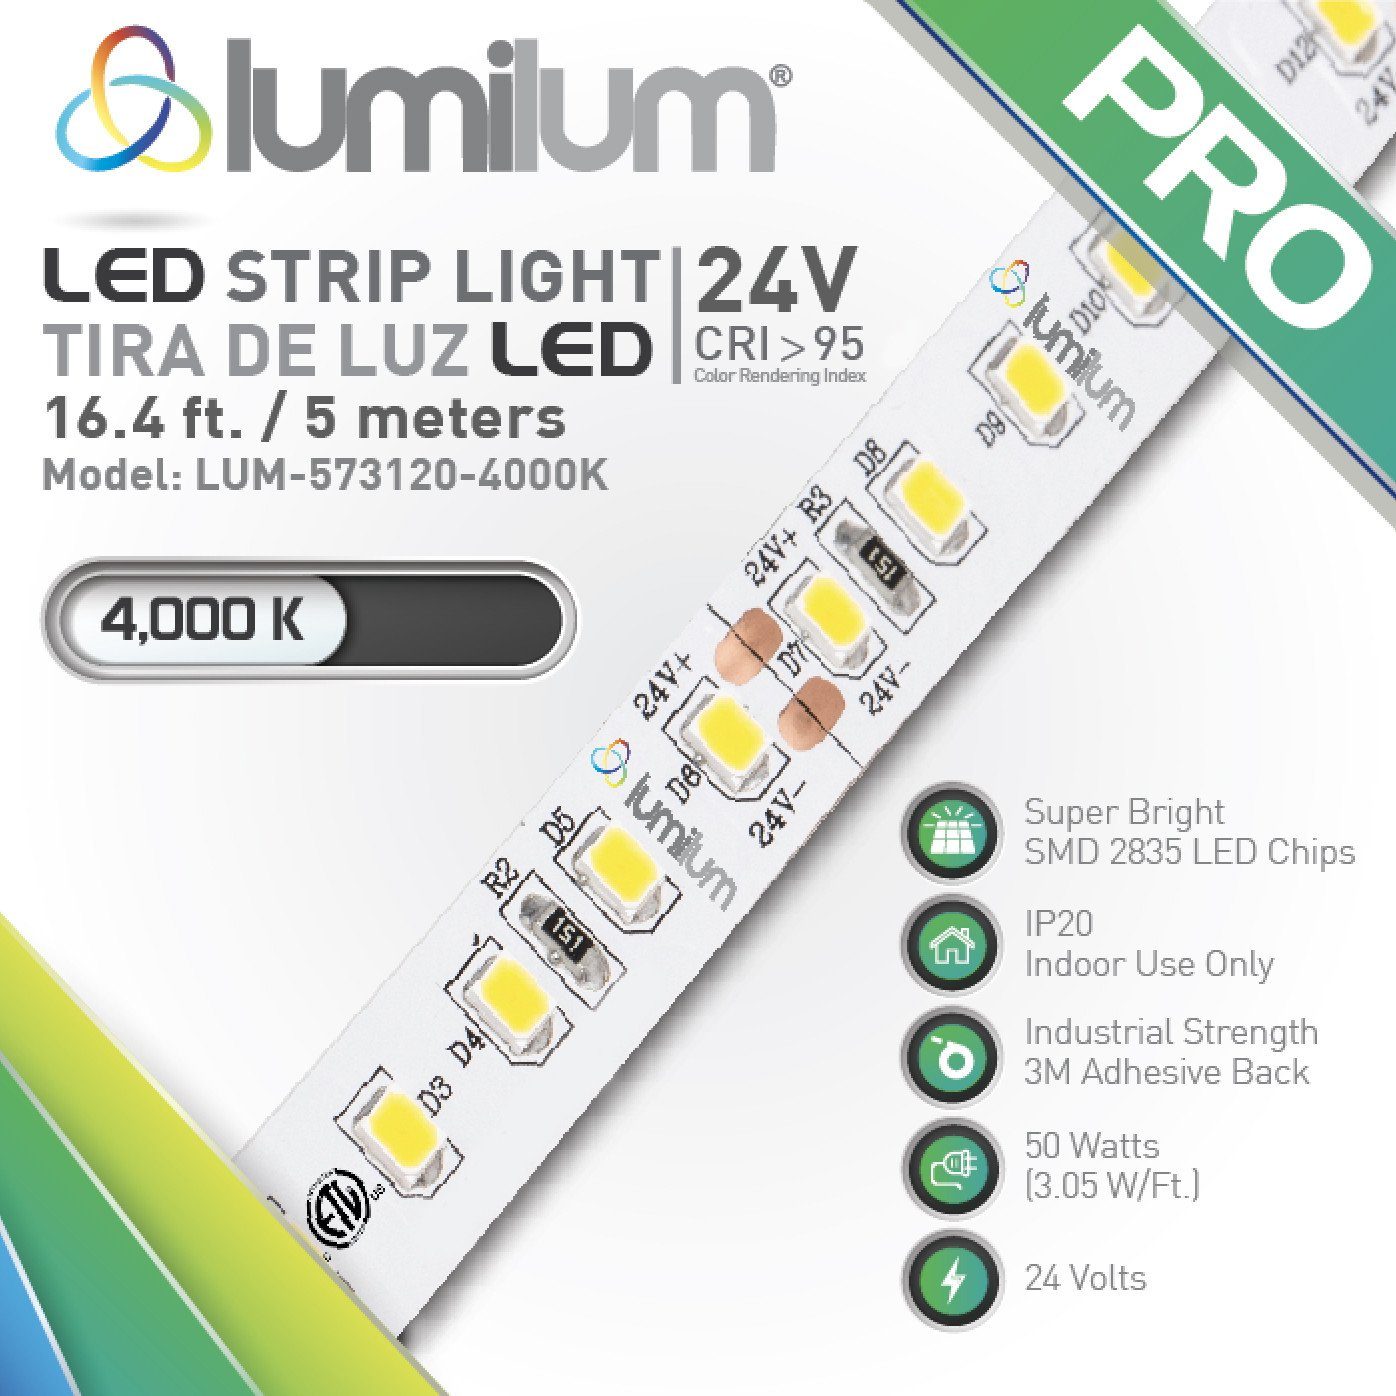 lumilum brand multicolored led strip light packaging face with diagonal strip light with forest green banner with white PRO text and 4000k color temperature text